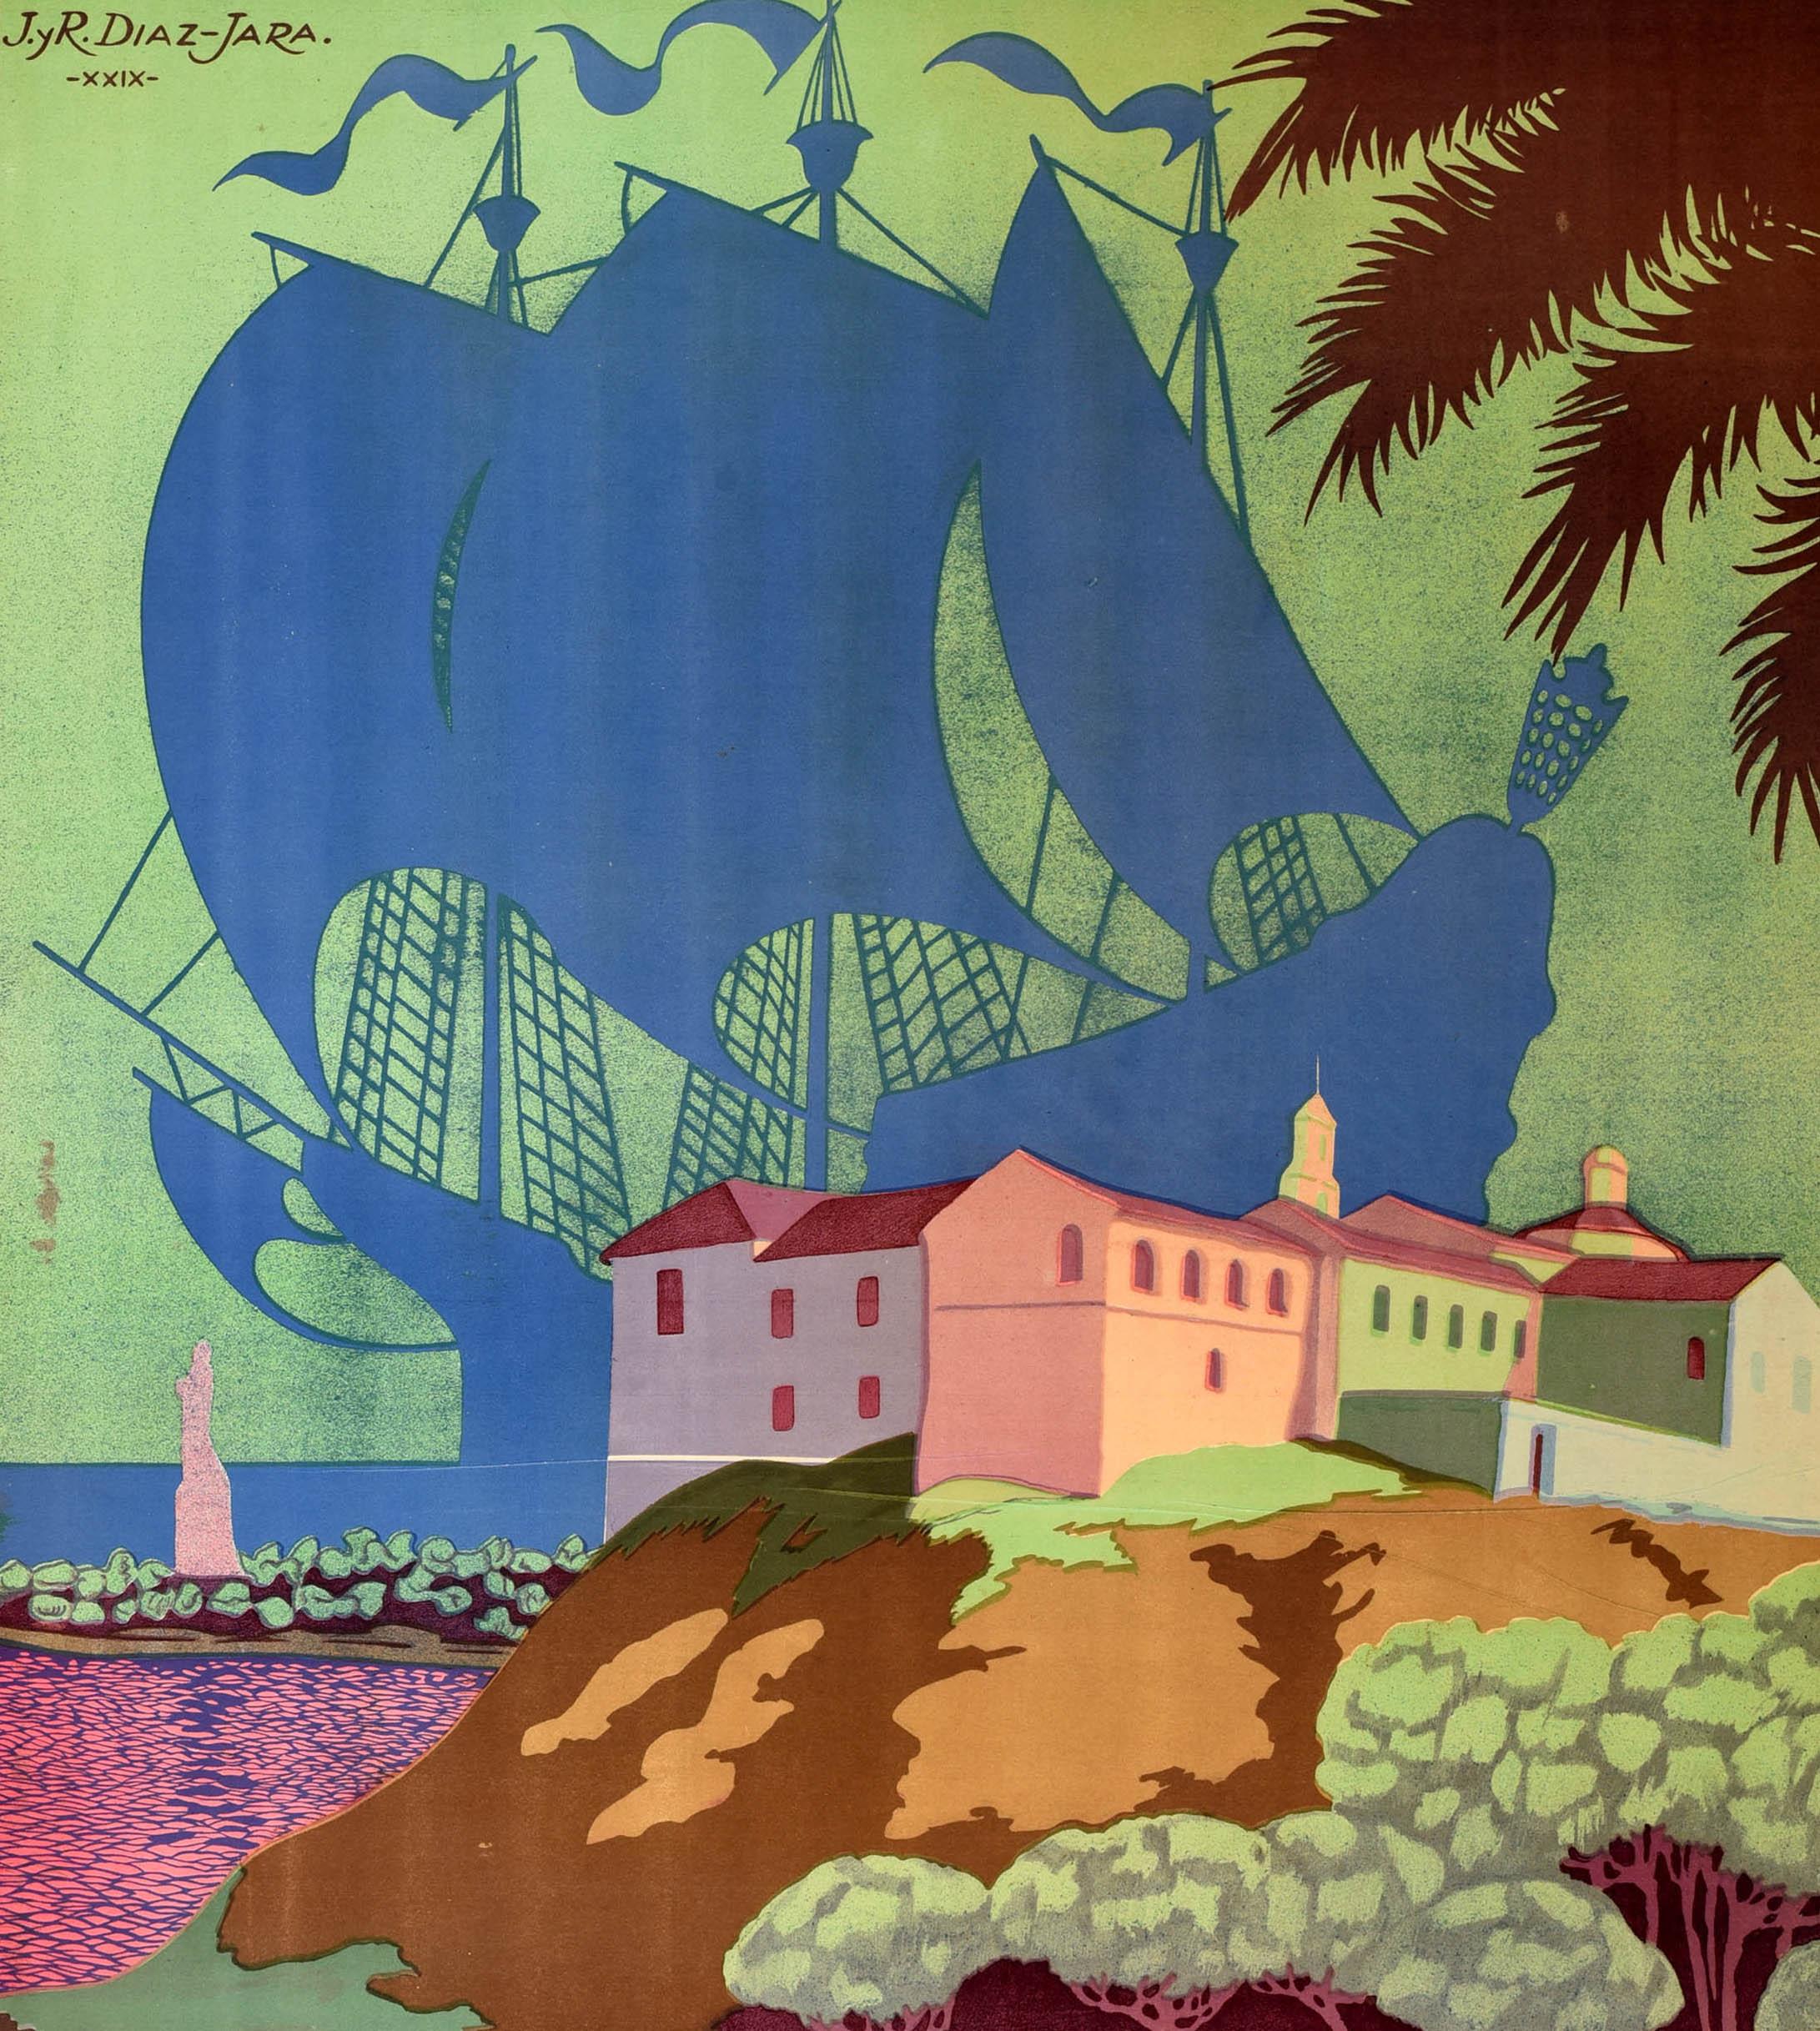 Original vintage travel poster issued by the Spanish national tourist board Patronato Nacional del Turismo PNT for Huelva Cuna de America / Cradle of America. Great design depicting a silhouette of a large tall ship in full sail against the sky with